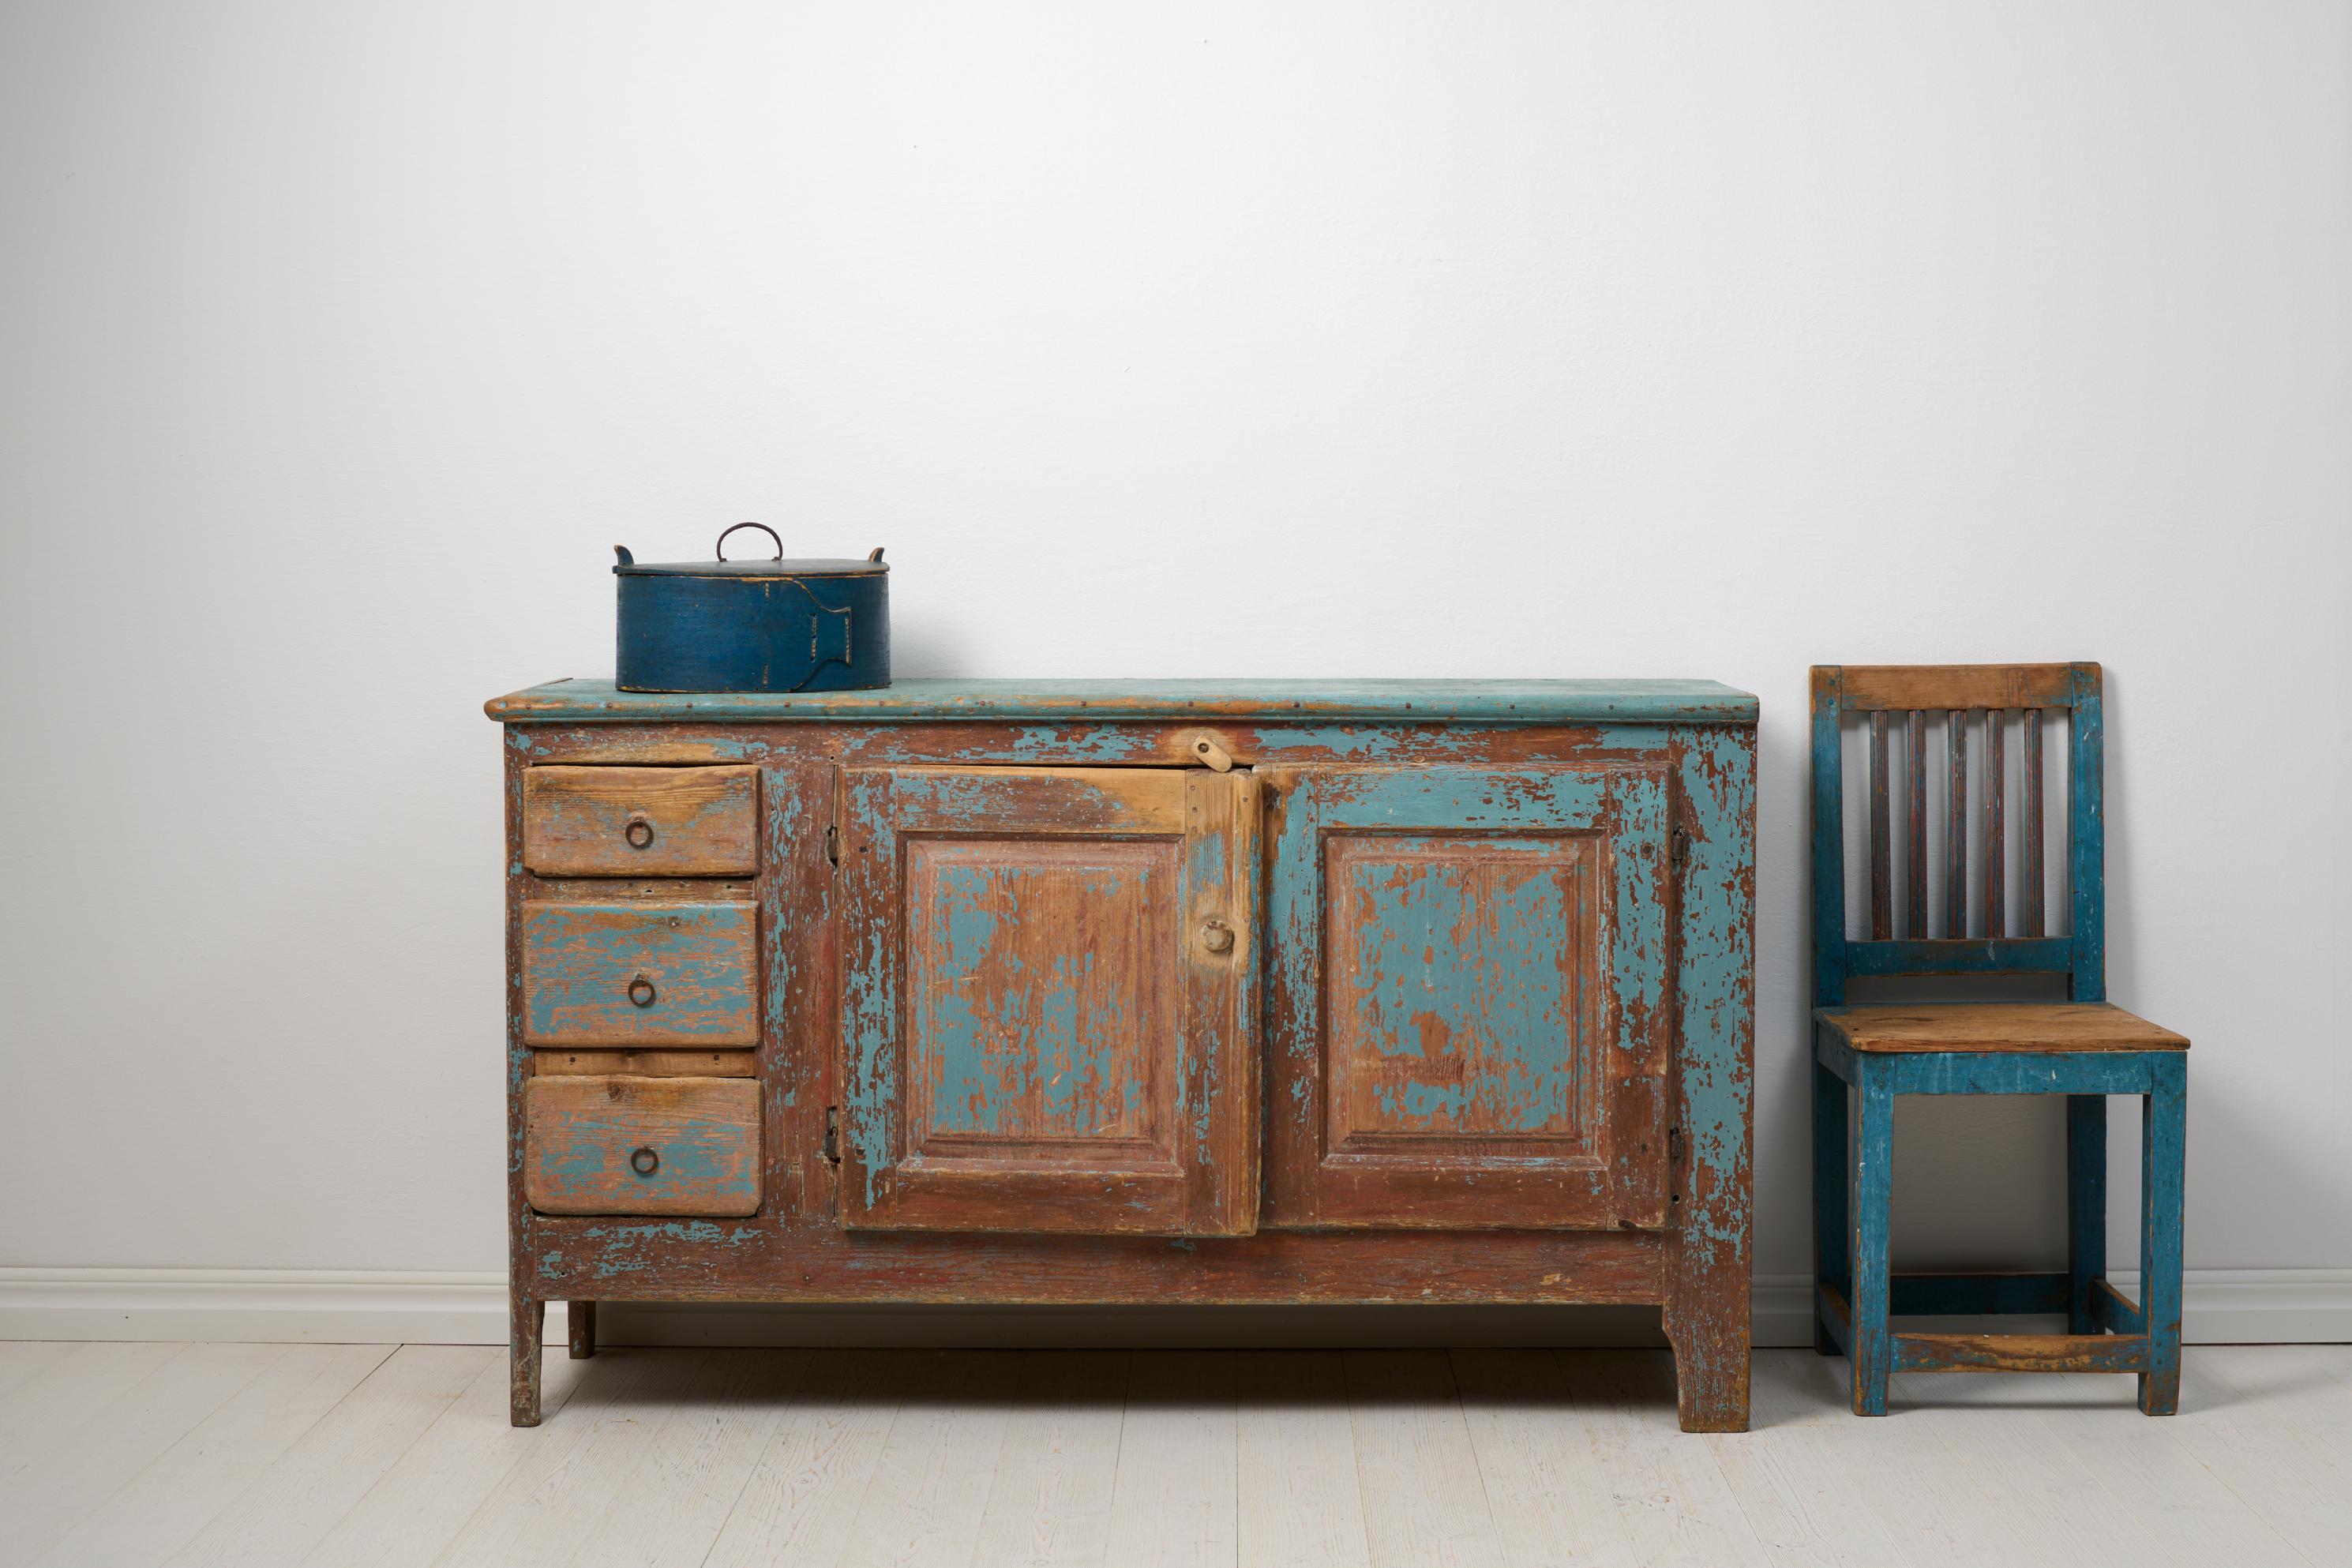 Antique rustic low sideboard from the early 1800s, around 1820 to 1840. Step back in time with this captivating antique rustic low sideboard, a true gem from the early 1800s. A genuine Swedish country house masterpiece, this handcrafted solid pine